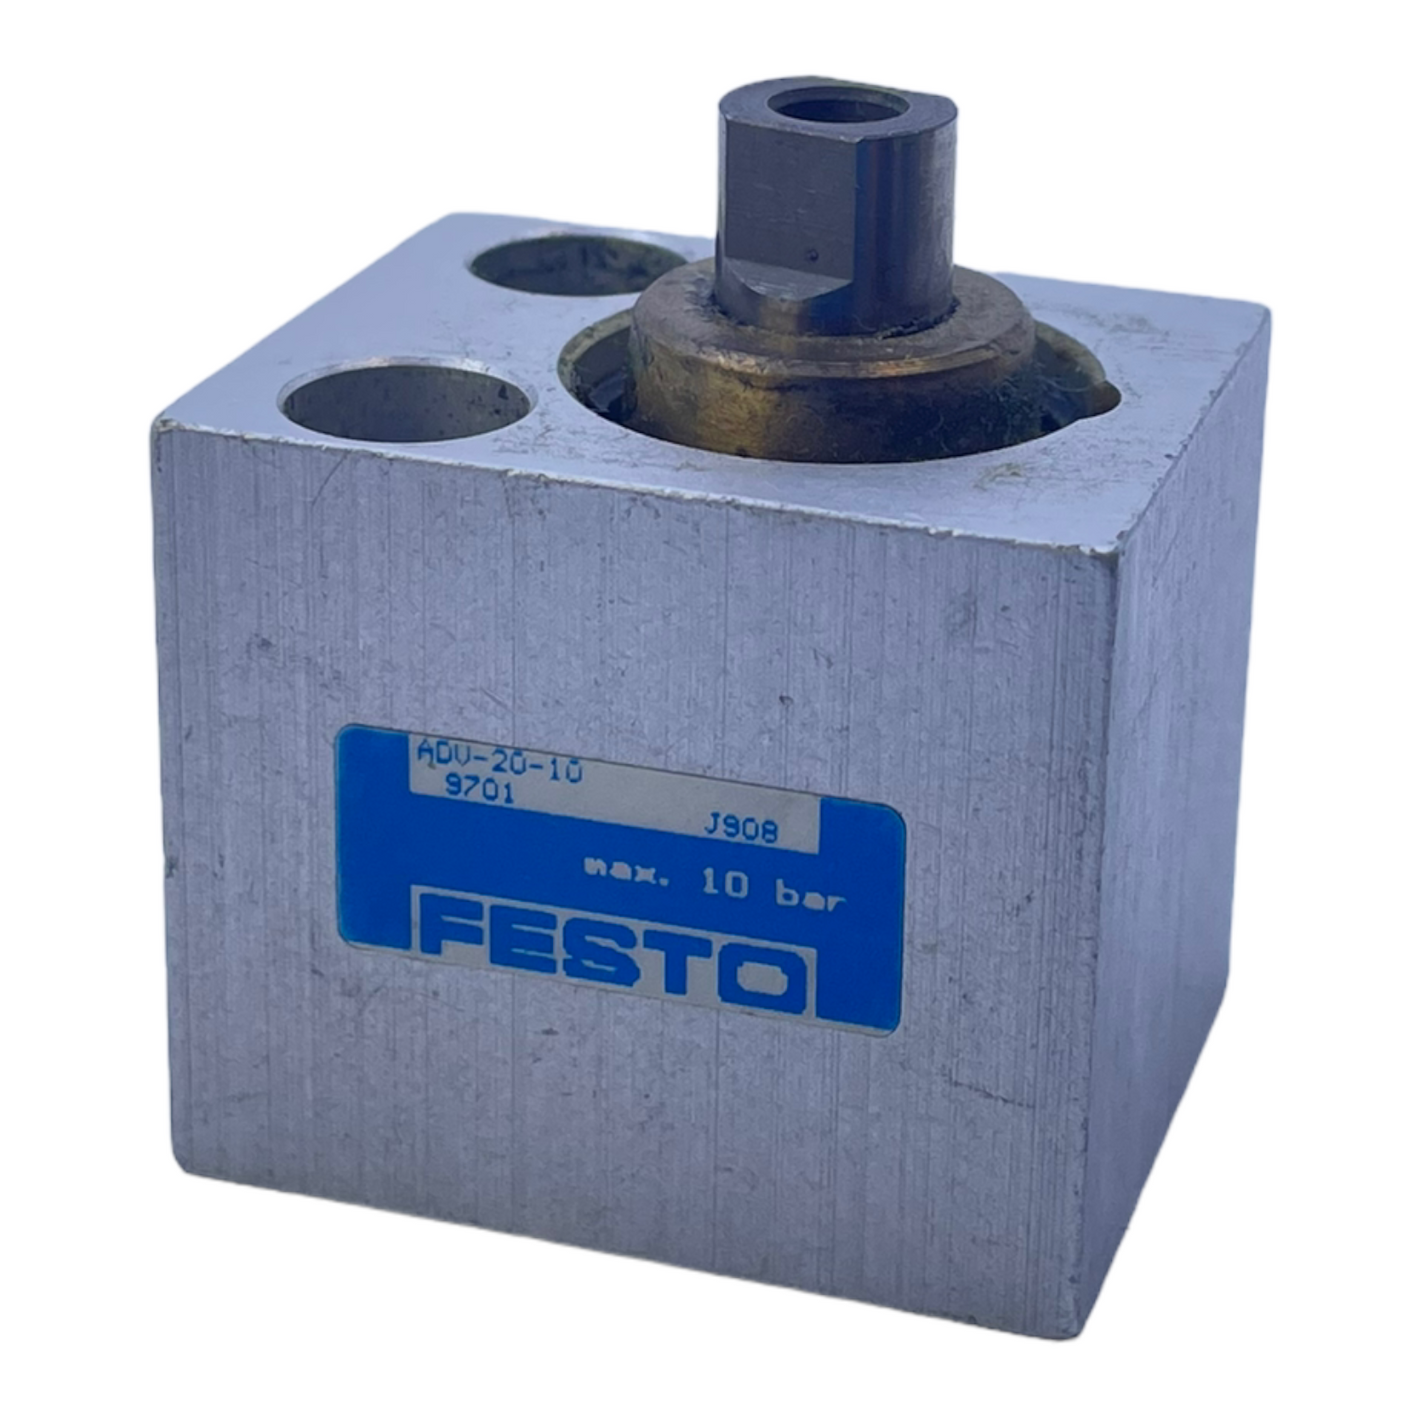 Festo ADV-20-10 compact cylinder 9701 for industrial use 10bar